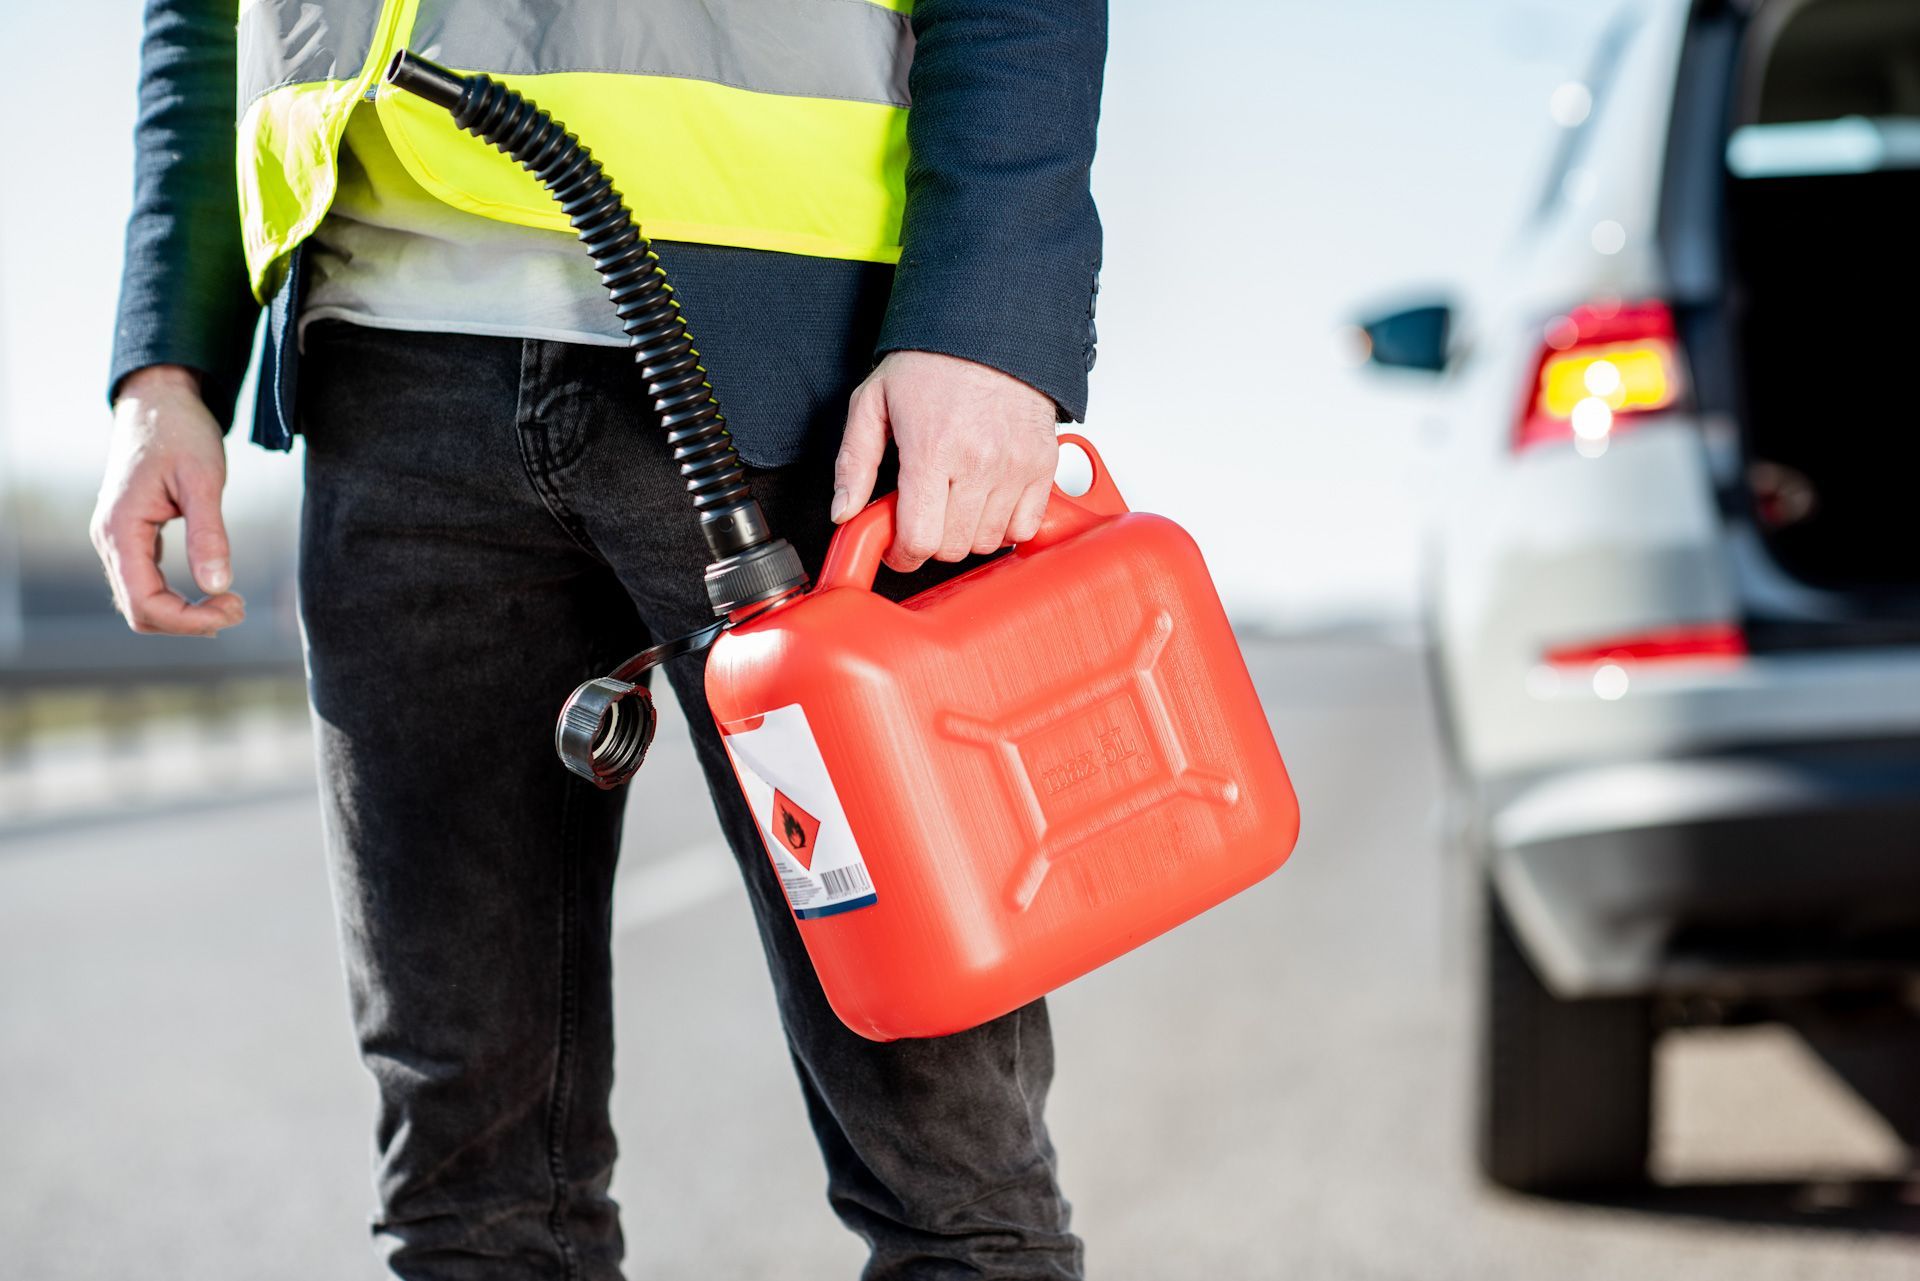 A man is holding a gas can in front of a car.